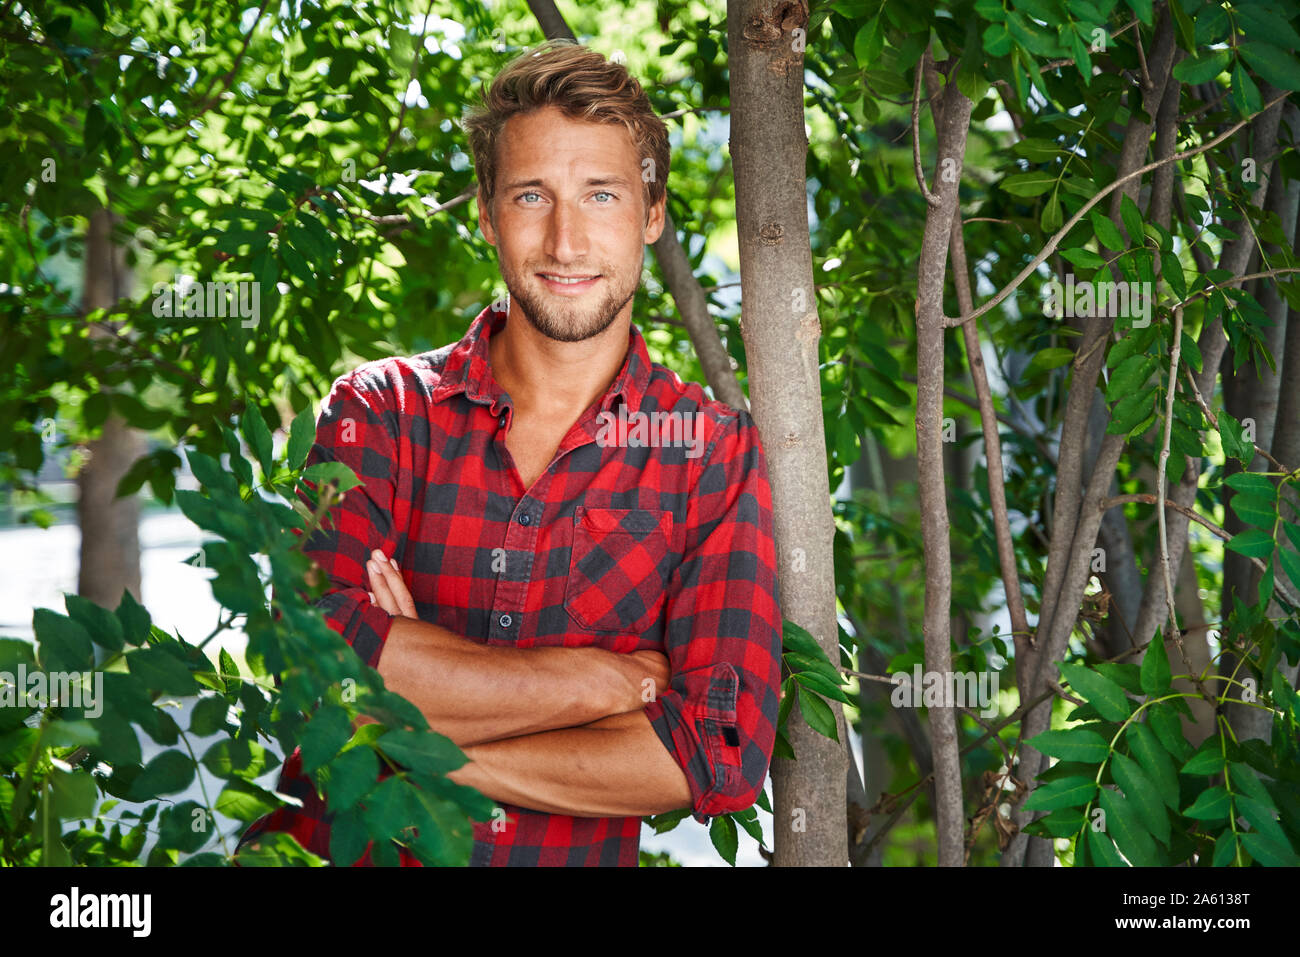 Portrait of confident young man wearing checkered shirt leaning against a tree Stock Photo